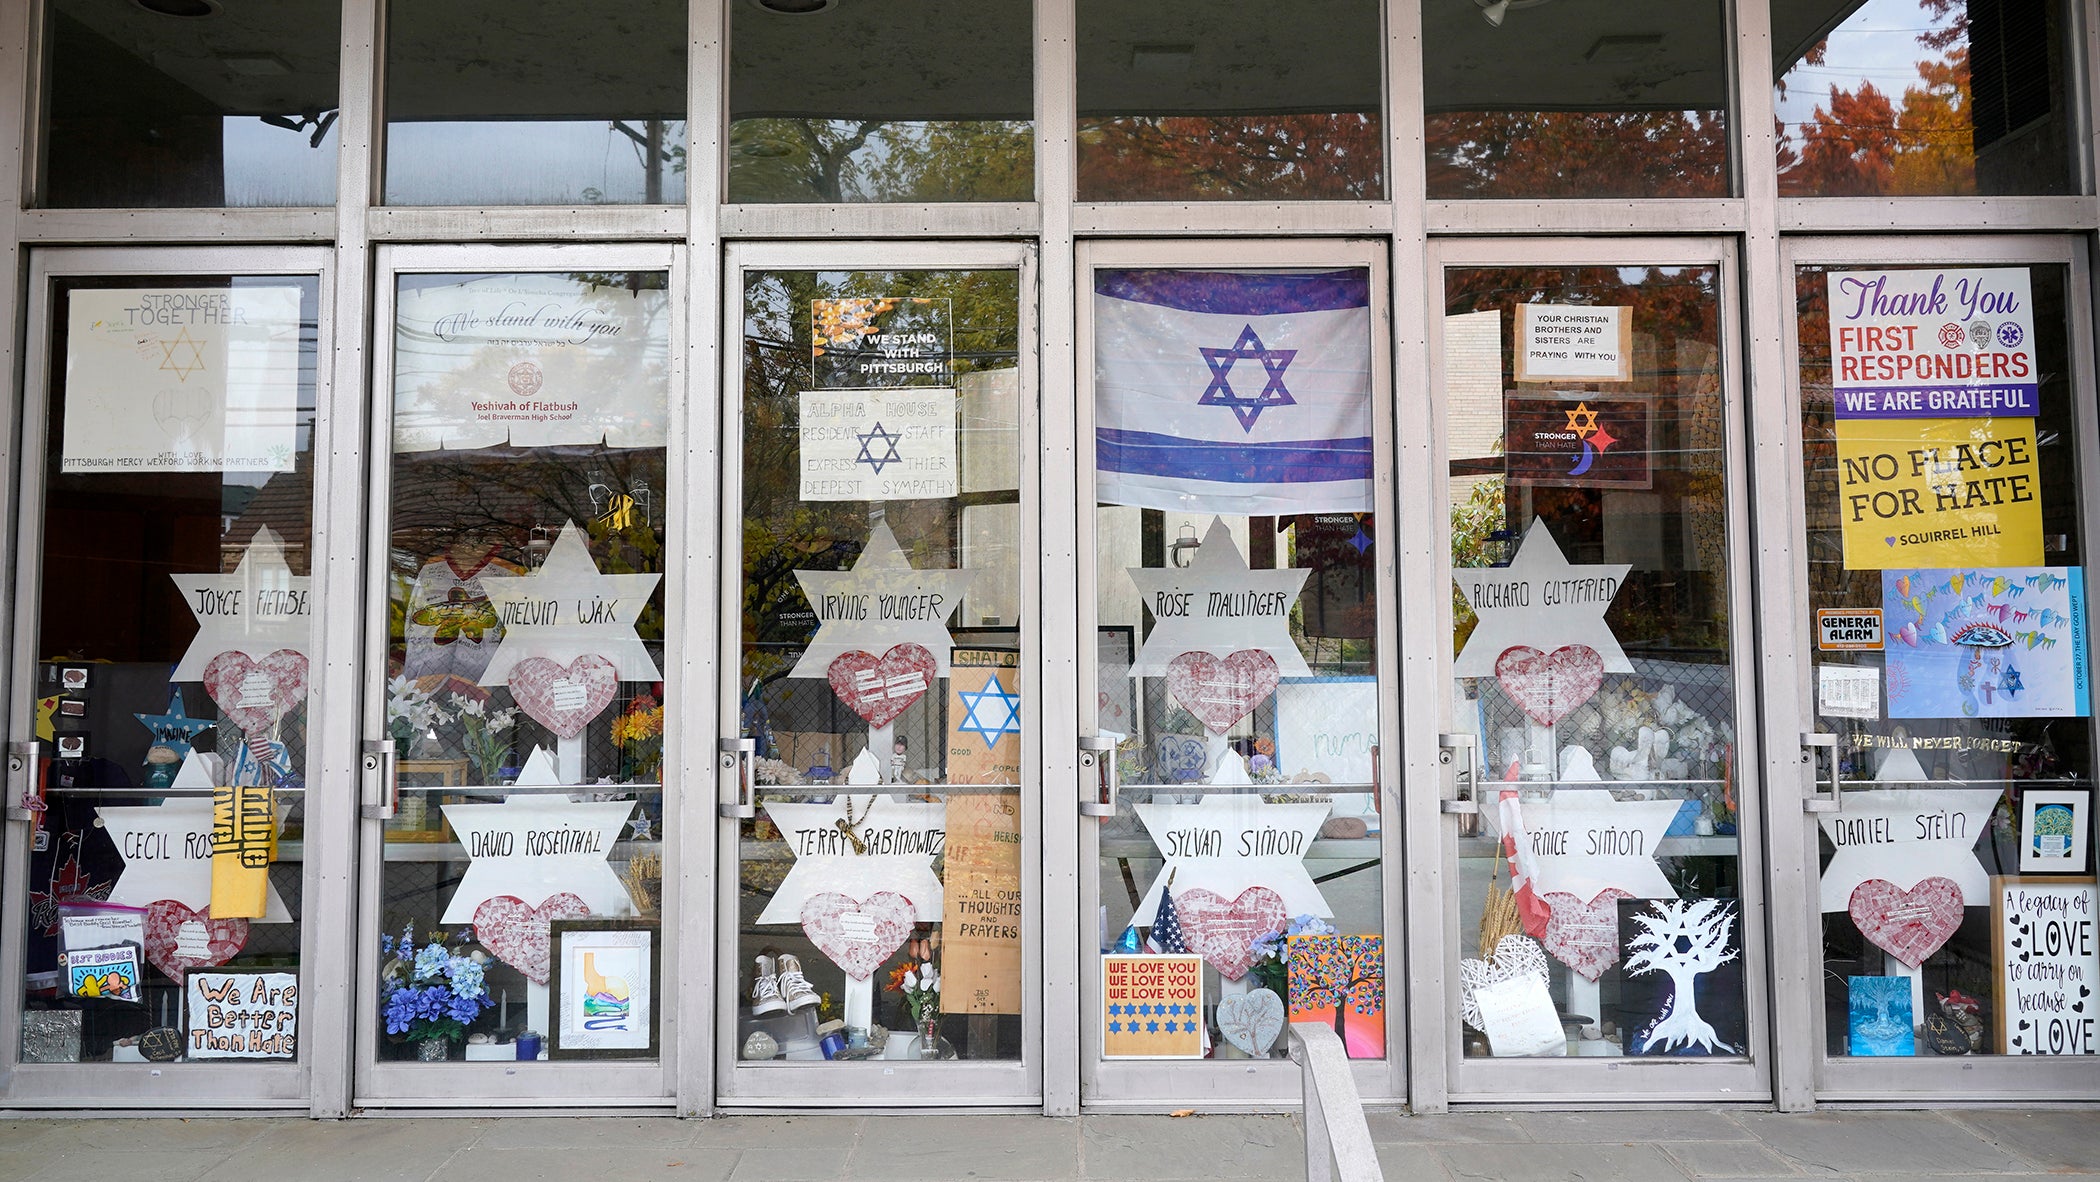 A memorial is placed inside the locked doors of the Tree of Life synagogue after the attack